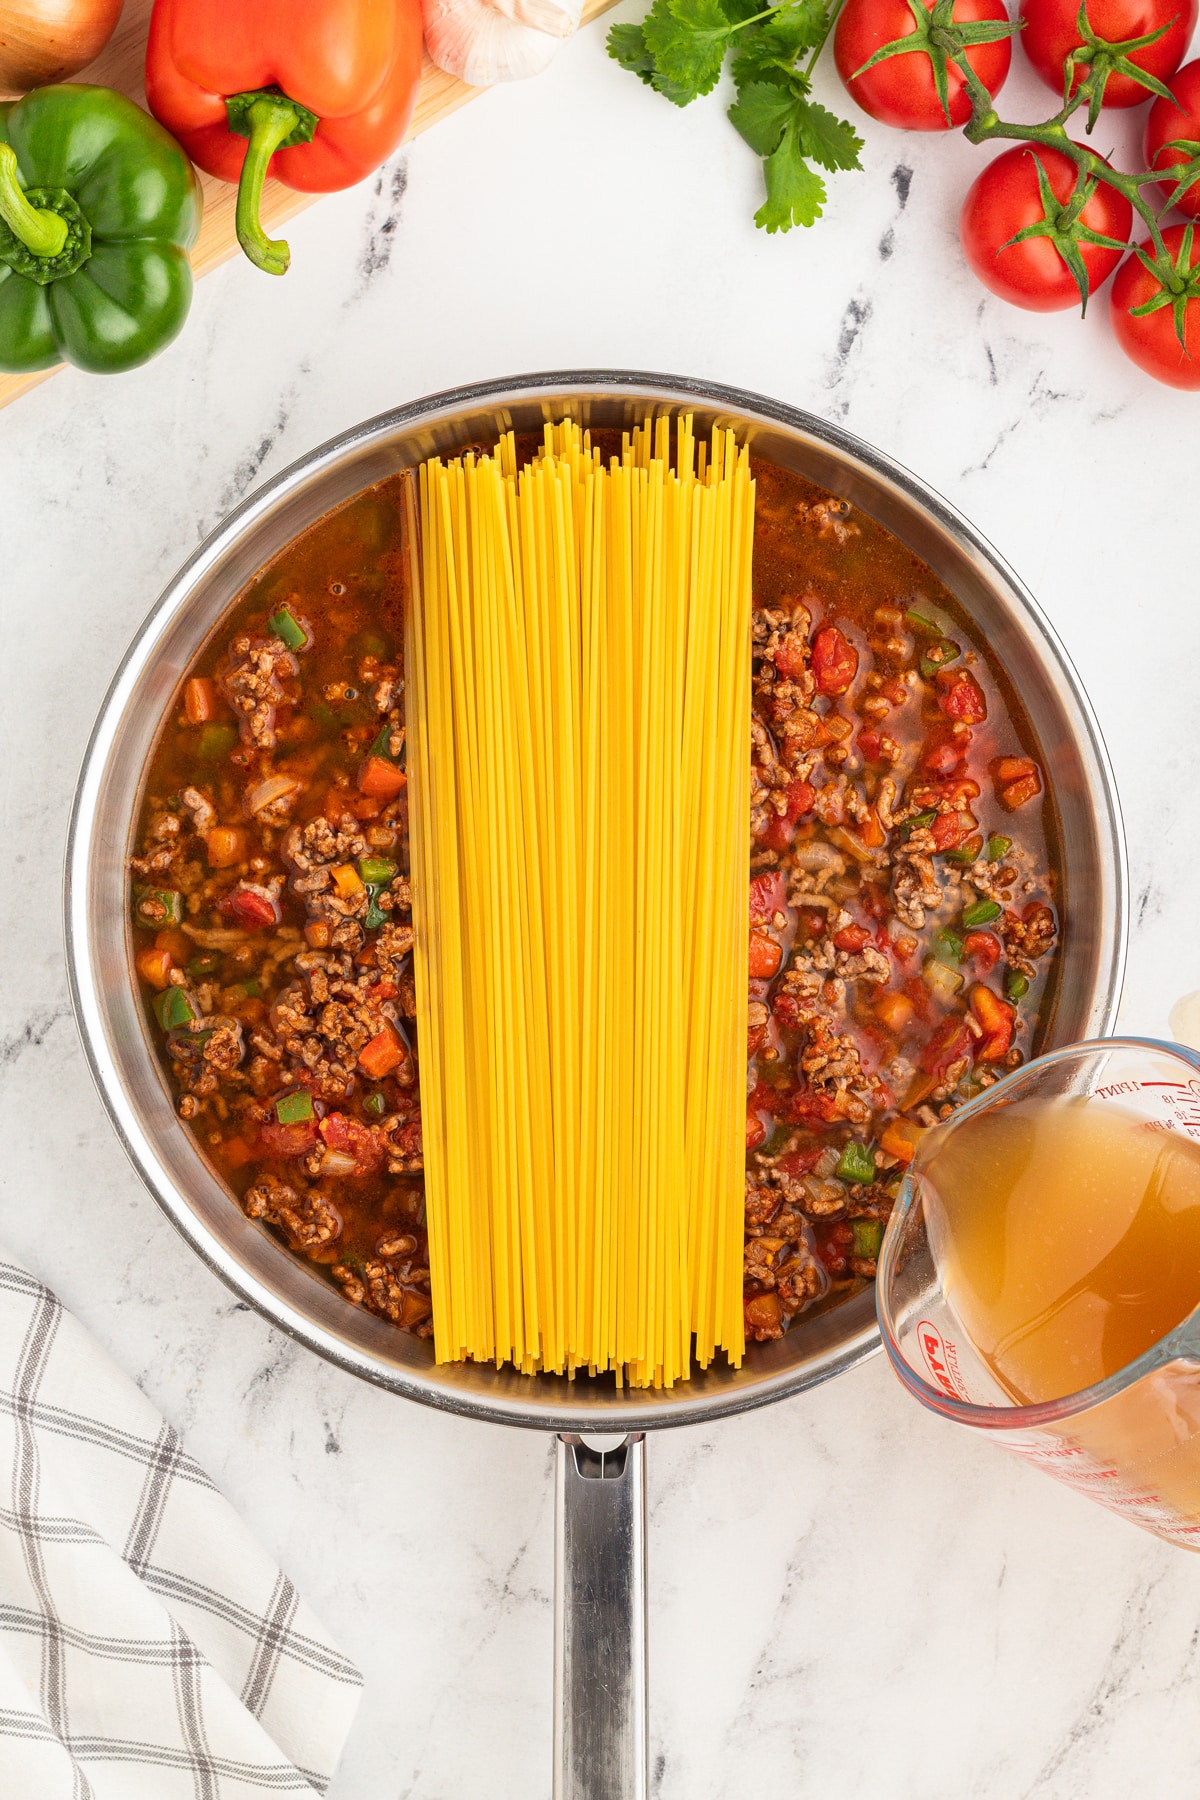 Another step in preparing Taco Spaghetti is to add the pasta noodles into the mixture.